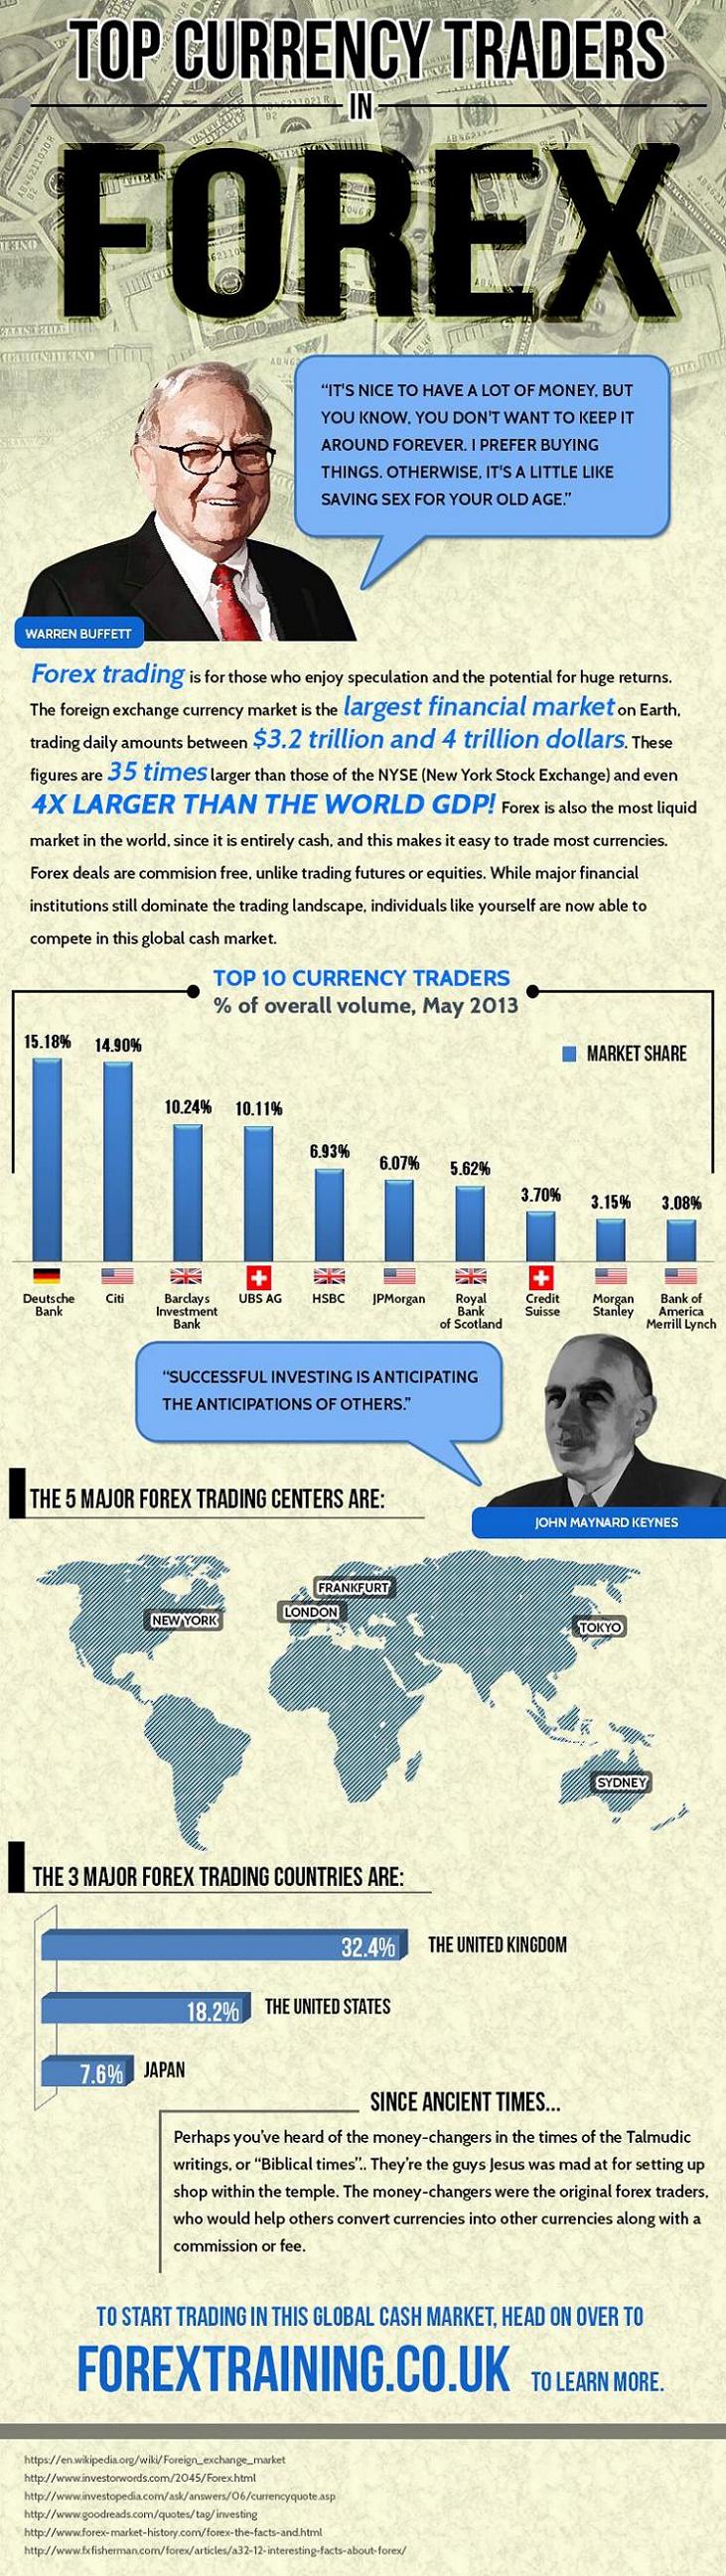 How many forex traders in the world